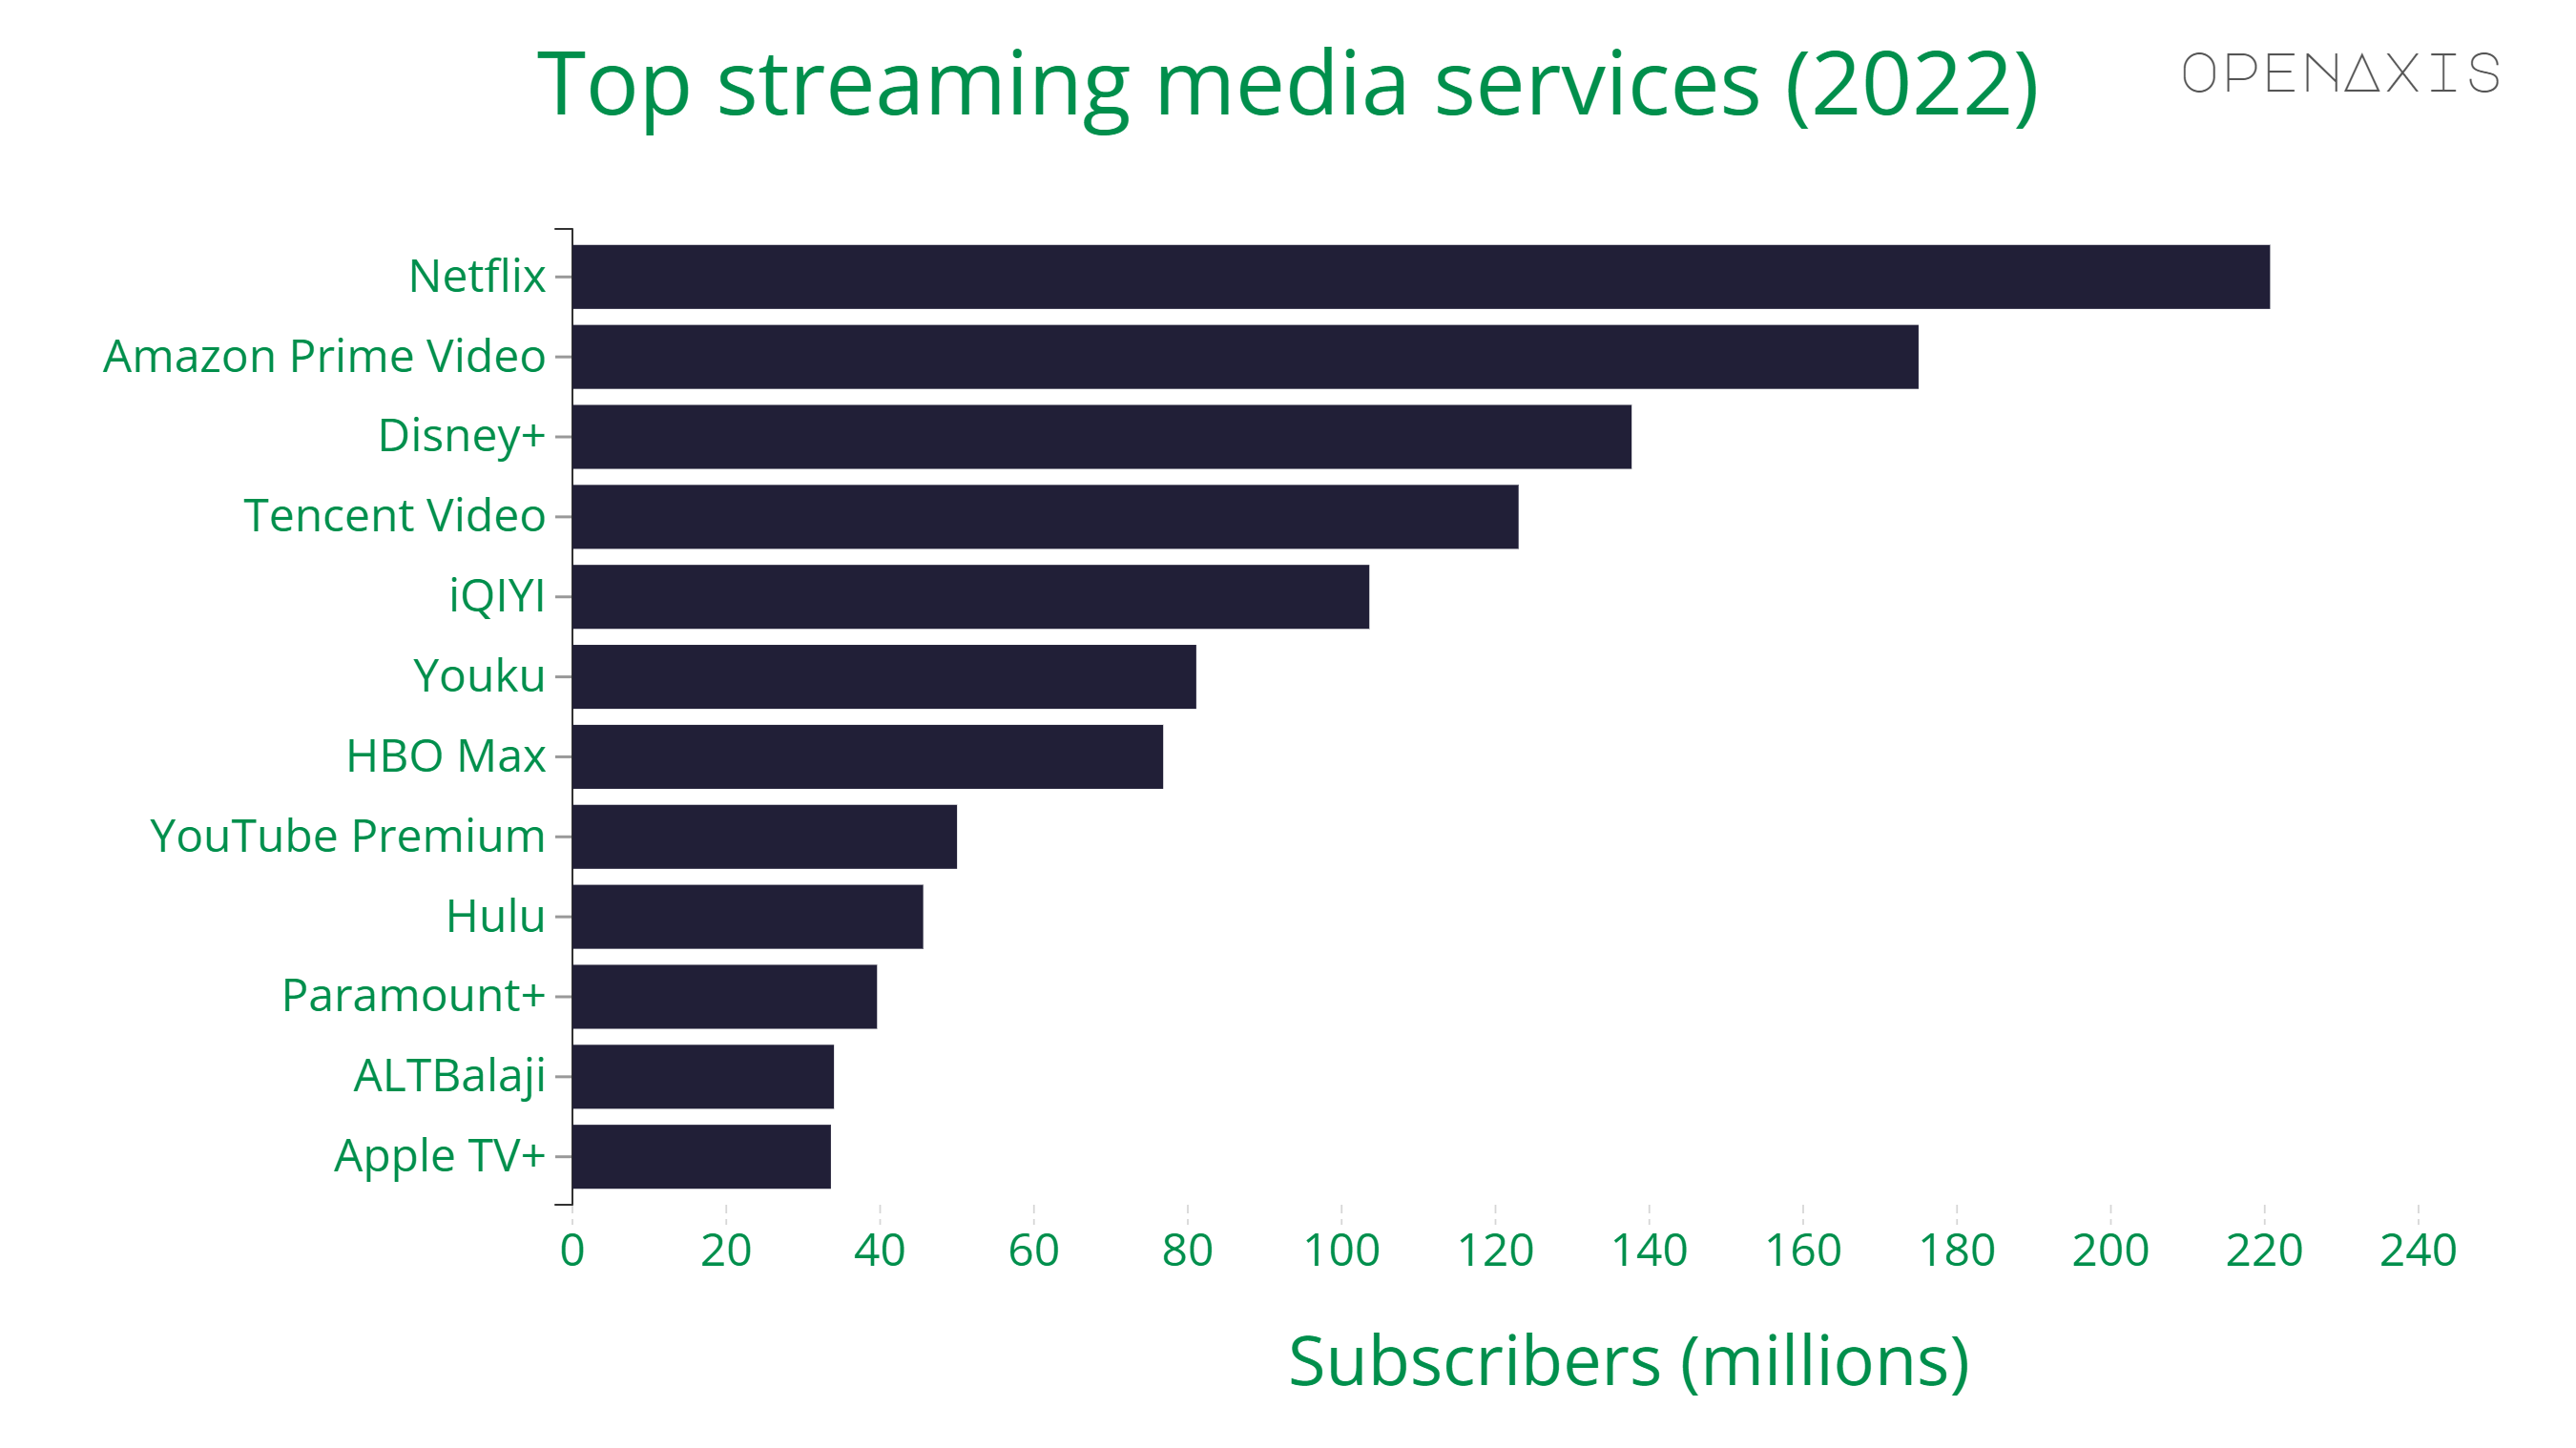 <p>Despite a drop in subscribers this year, numbering at least 1 million, Netflix remains the top streaming media platform in the world with about 220 million subscribers. </p><p><br /></p><p><span data-index="0" data-denotation-char data-id="0" data-value="&lt;a href=&quot;/search?q=%23media&quot; target=_self&gt;#media" data-link="/search?q=%23media">﻿<span contenteditable="false"><span></span><a href="/search?q=%23media" target="_self">#media</a></span>﻿</span> <span data-index="0" data-denotation-char data-id="0" data-value="&lt;a href=&quot;/search?q=%23entertainment&quot; target=_self&gt;#entertainment" data-link="/search?q=%23entertainment">﻿<span contenteditable="false"><span></span><a href="/search?q=%23entertainment" target="_self">#entertainment</a></span>﻿</span></p><p><br /></p><p>Source: <a href="/data/3983" target="_blank">Streaming platforms, Wikipedia</a></p><p><br /></p>